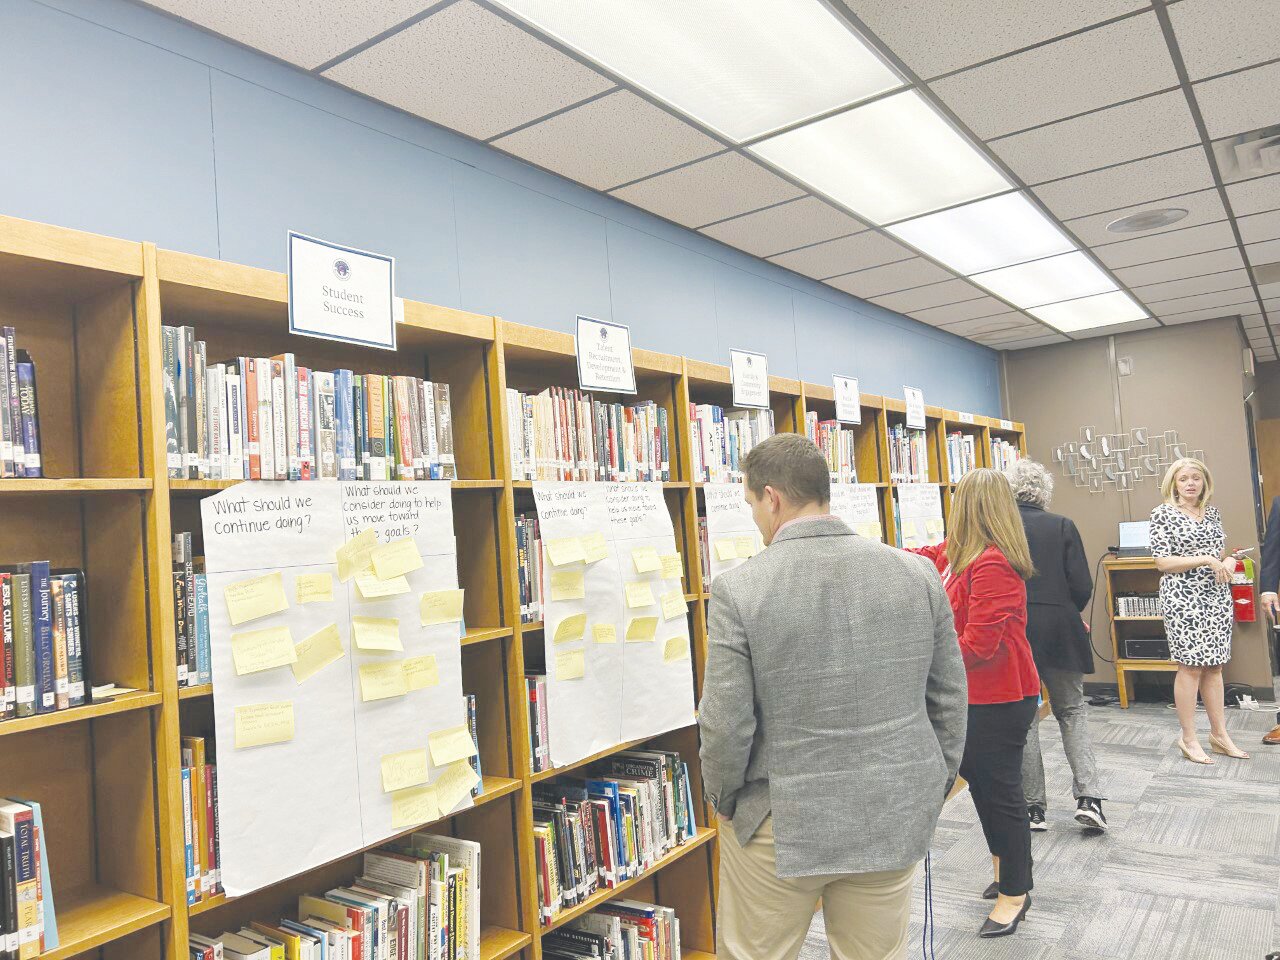 Residents prioritized their long-term vision of the county, including recreation and infrastructure, at public workshops in all six districts. Here, people in Keystone Heights examined some of the suggestions already collected.